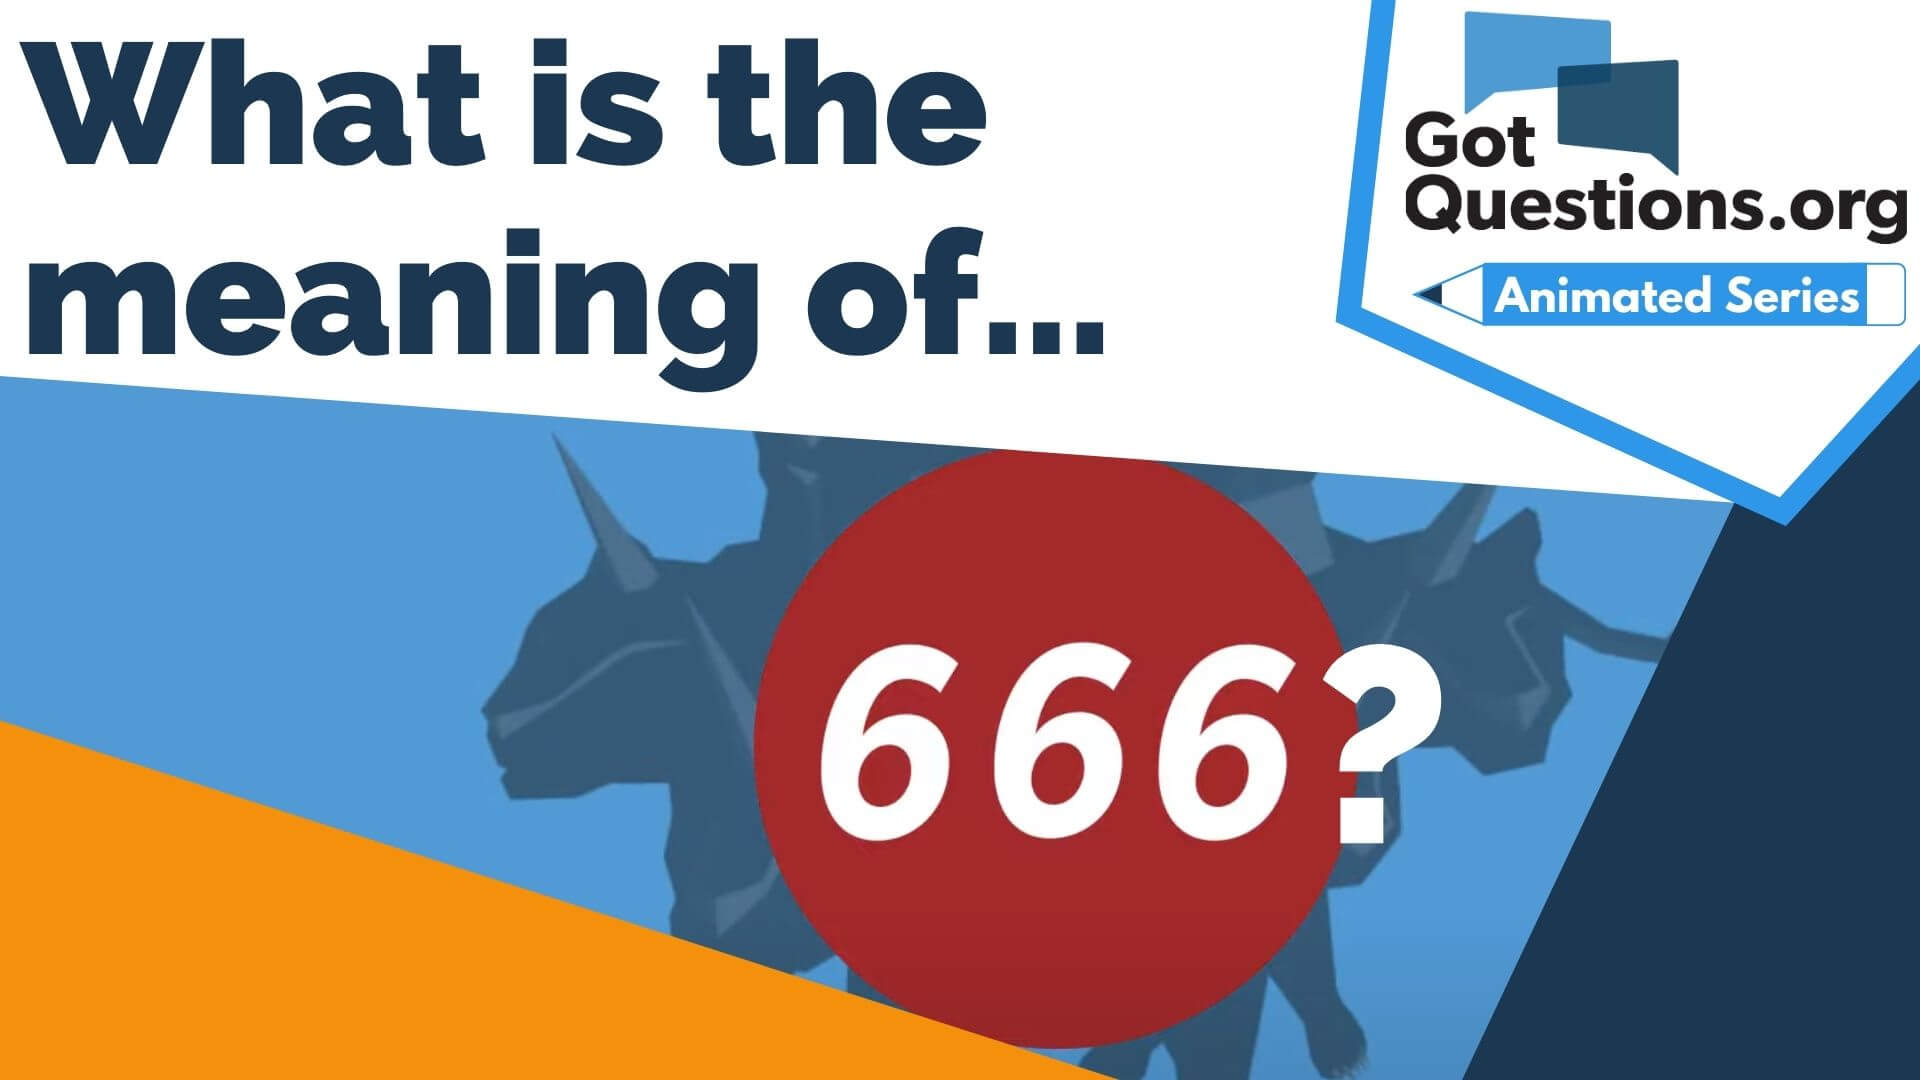 What Does 666 Mean? What Is the Mark of the Beast?